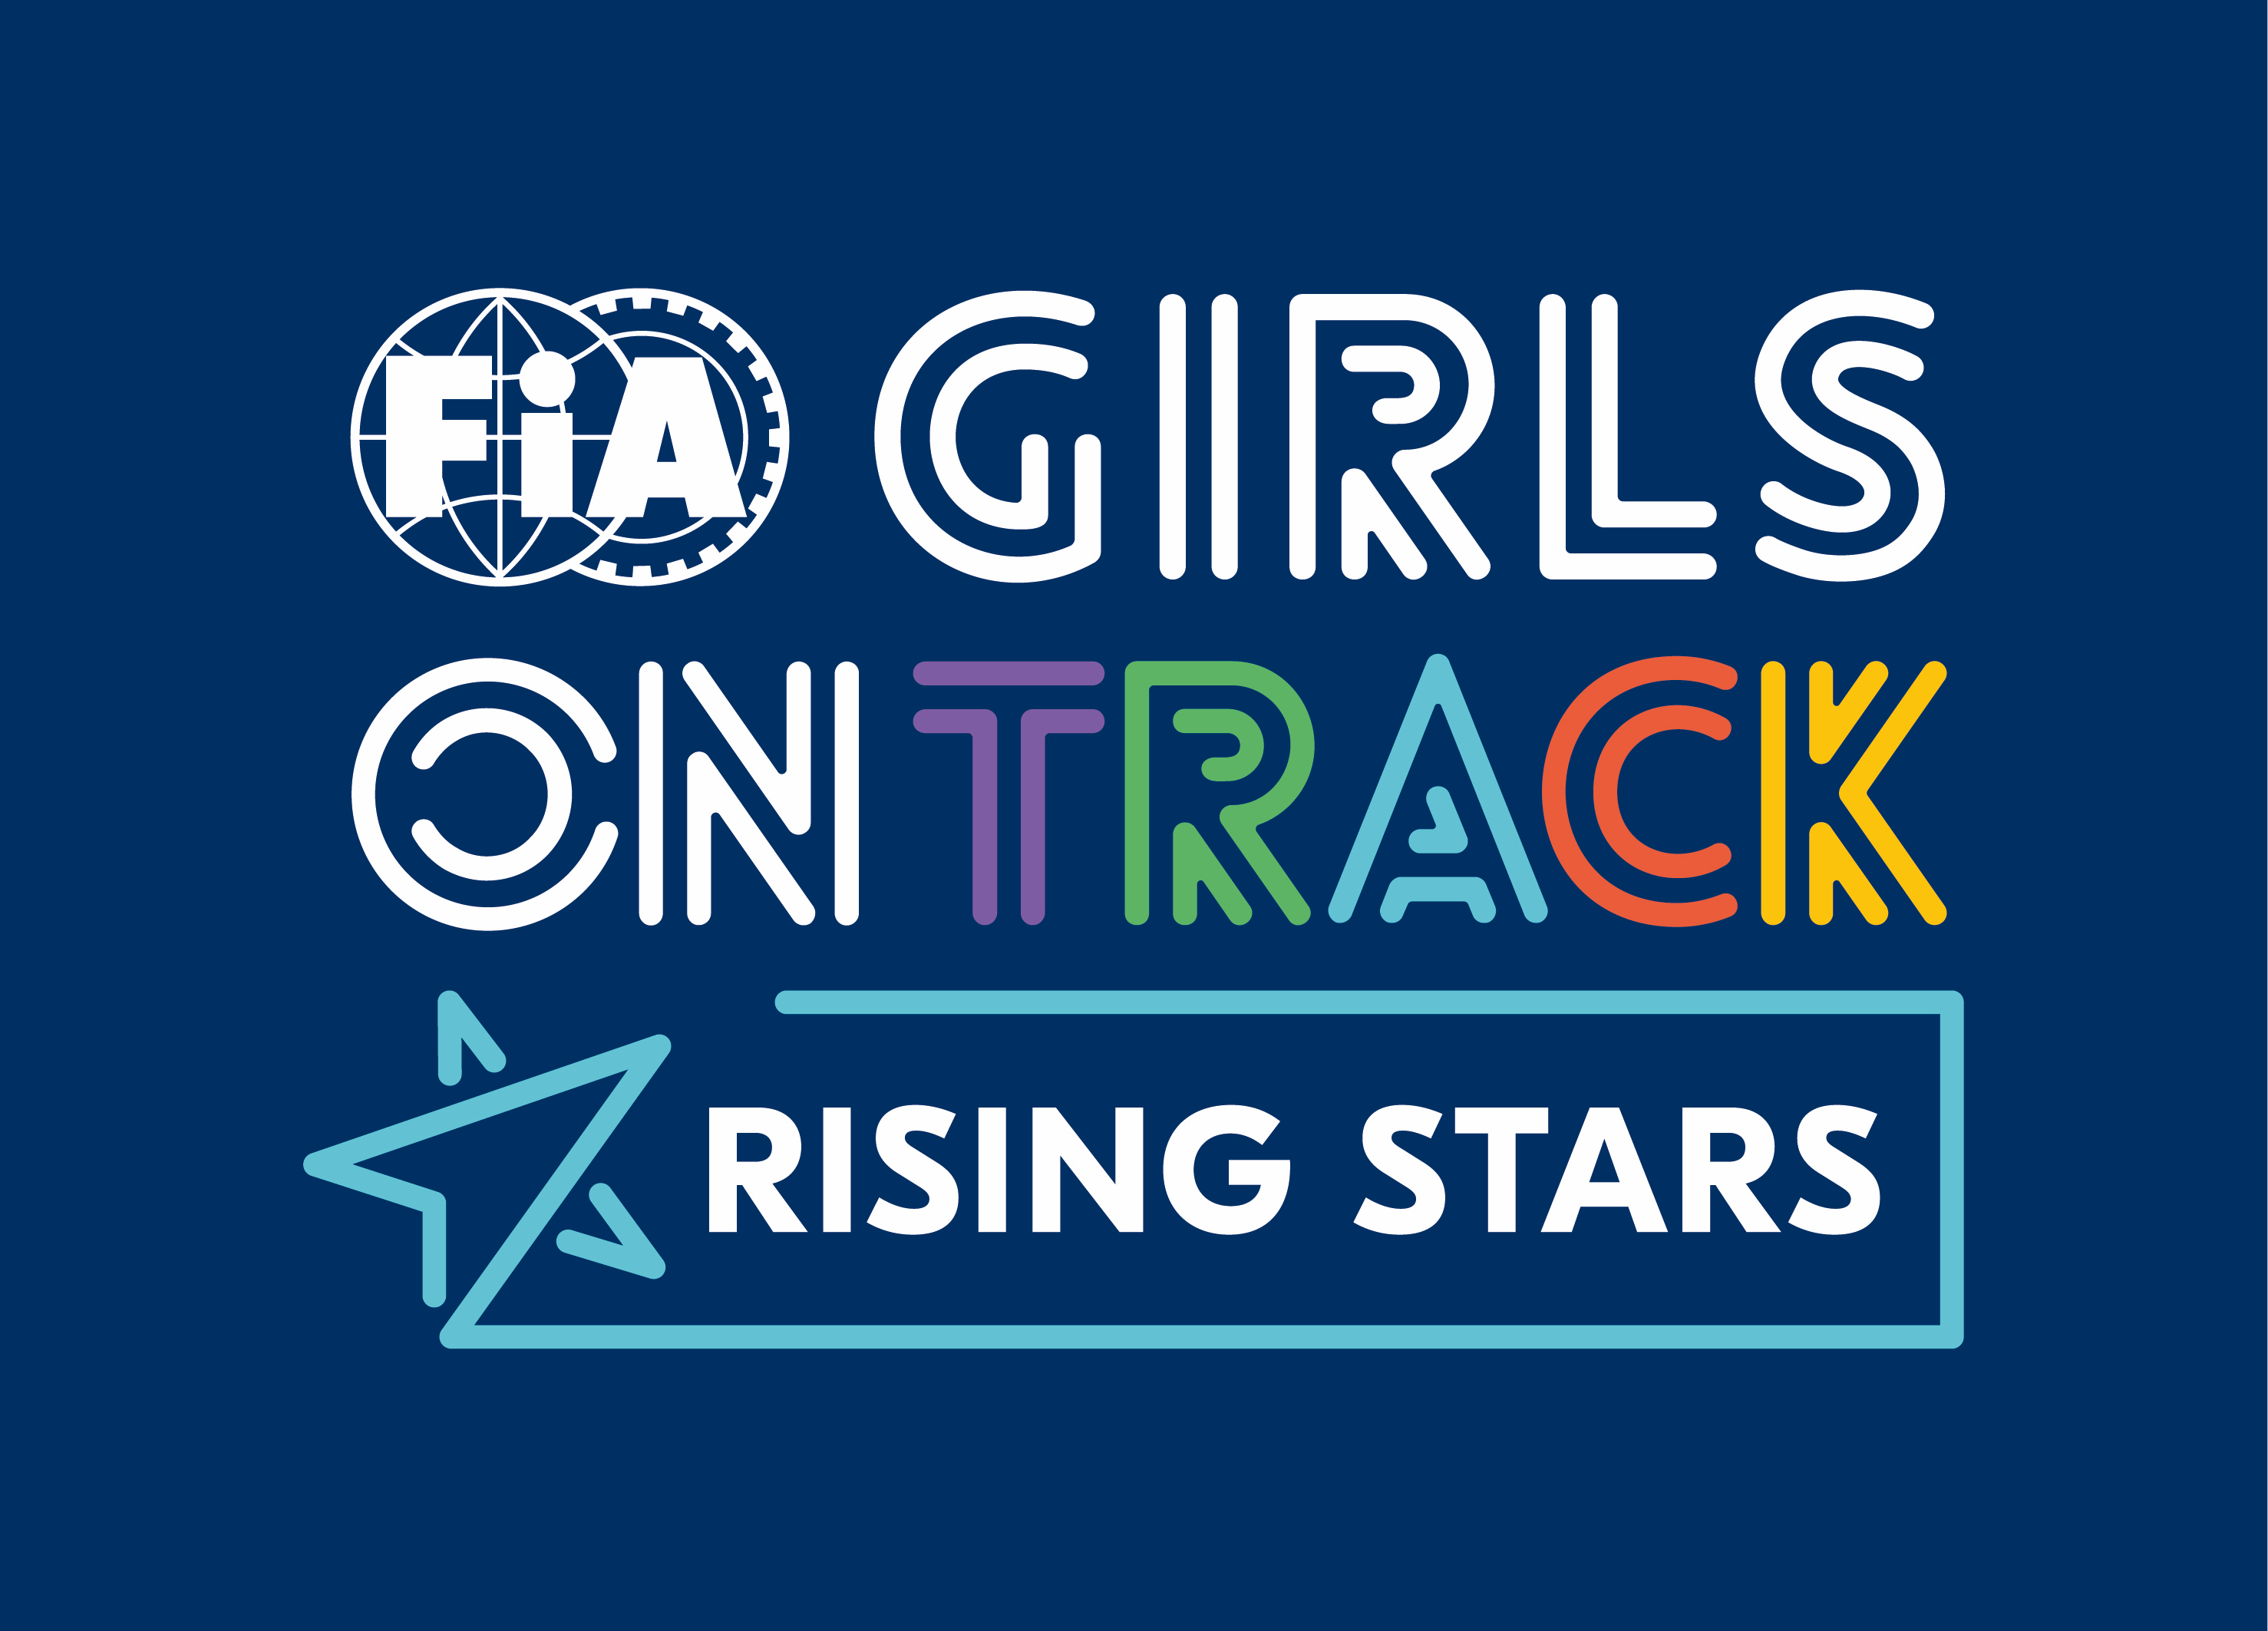 FIA Girls on Track - Rising Stars 2023 edition is launched